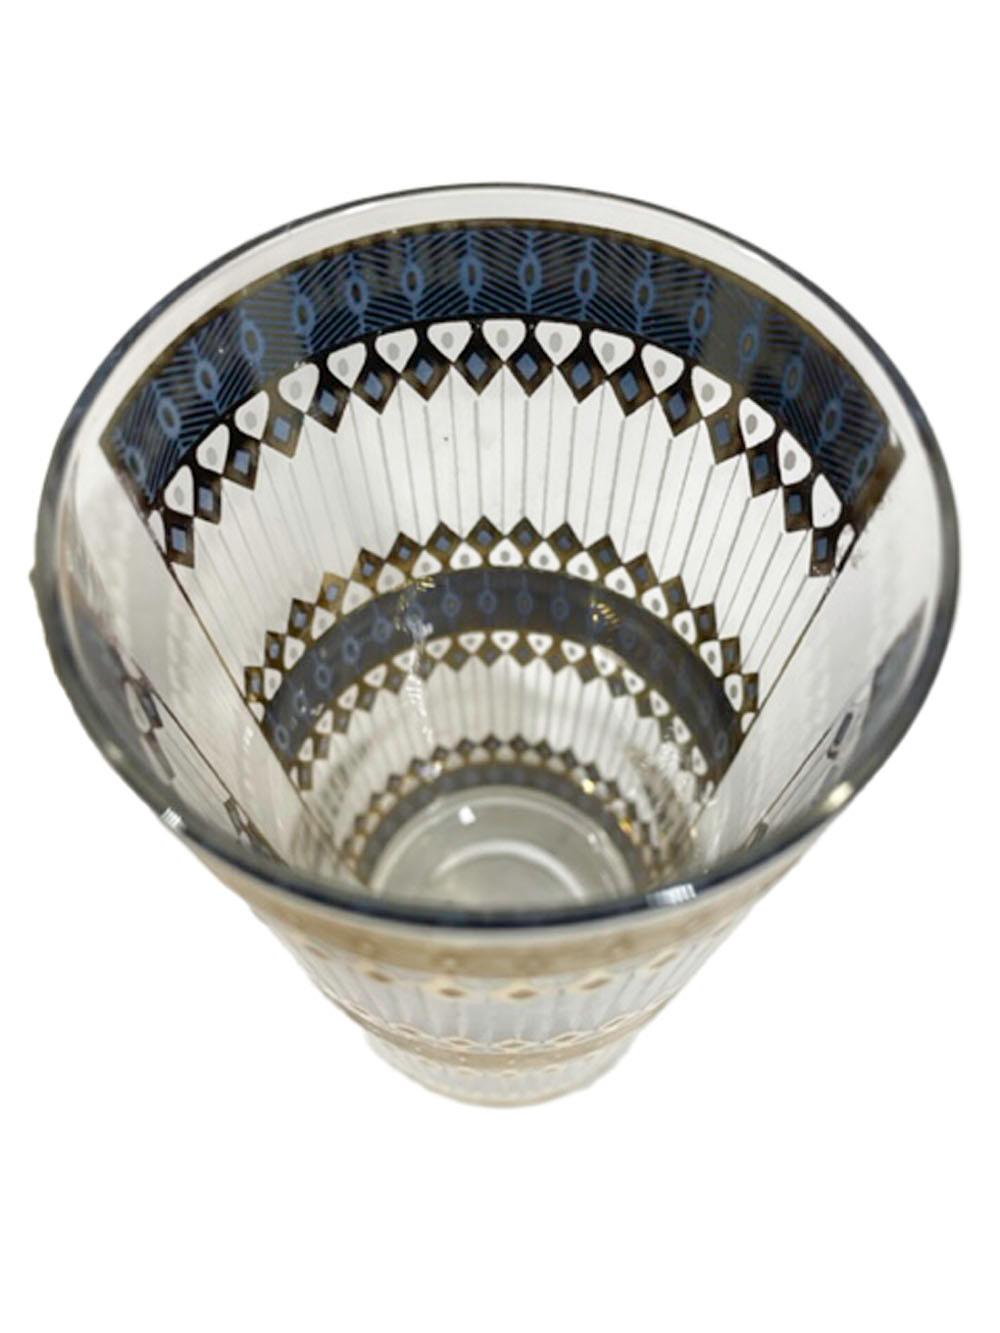 Six Mid-Century Culver, Ltd Highball Glasses in the Barcelona Pattern In Good Condition For Sale In Nantucket, MA